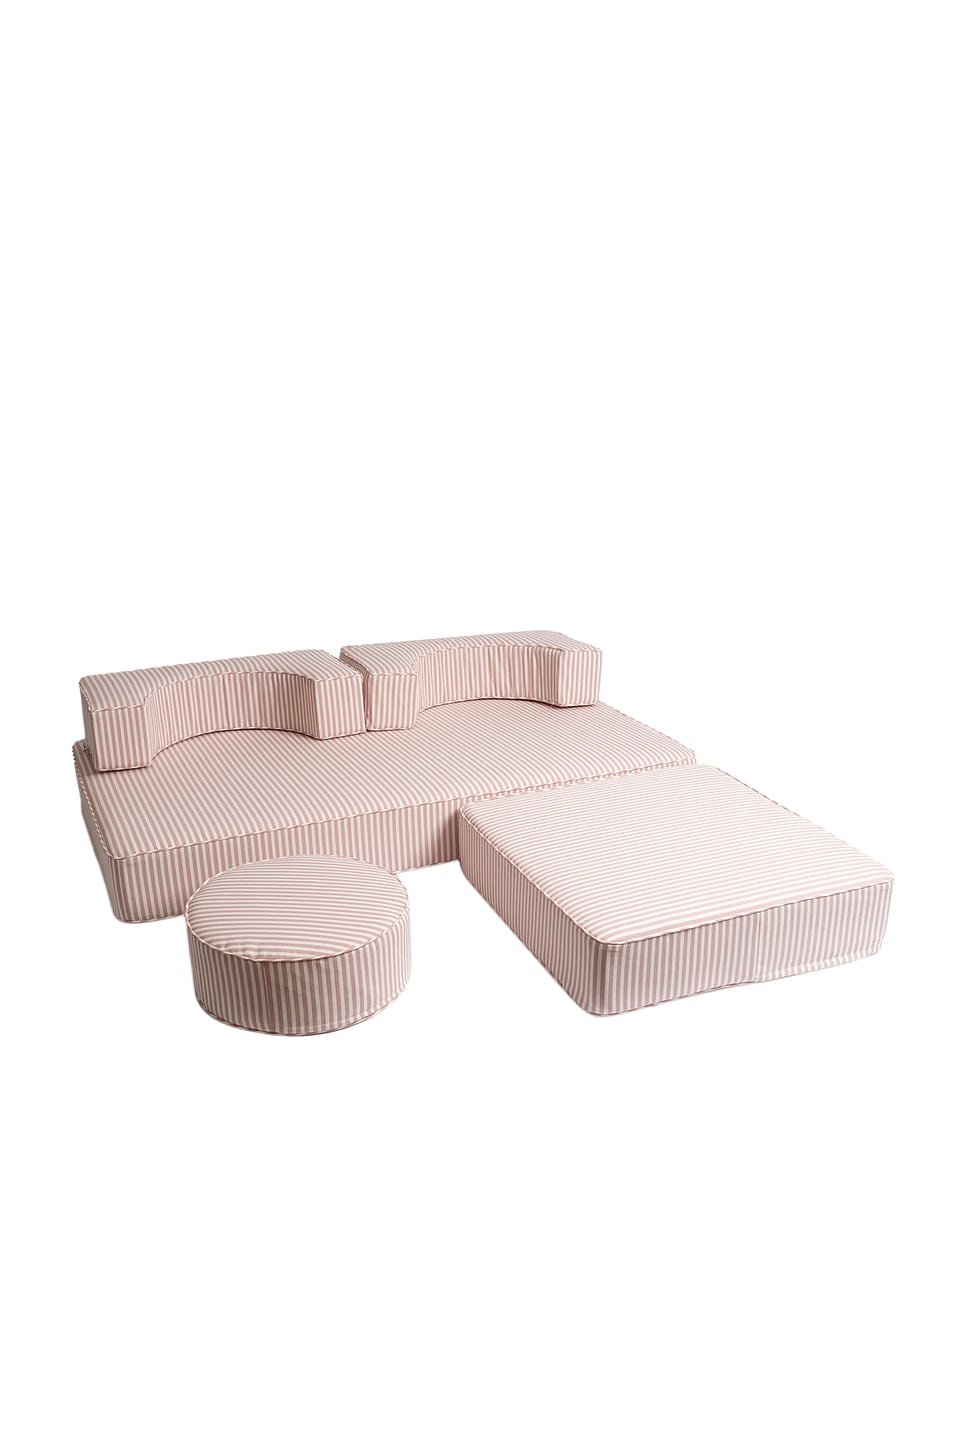 Image 1 of business & pleasure co. Modular Pillow Stack in Laurens Pink Stripe